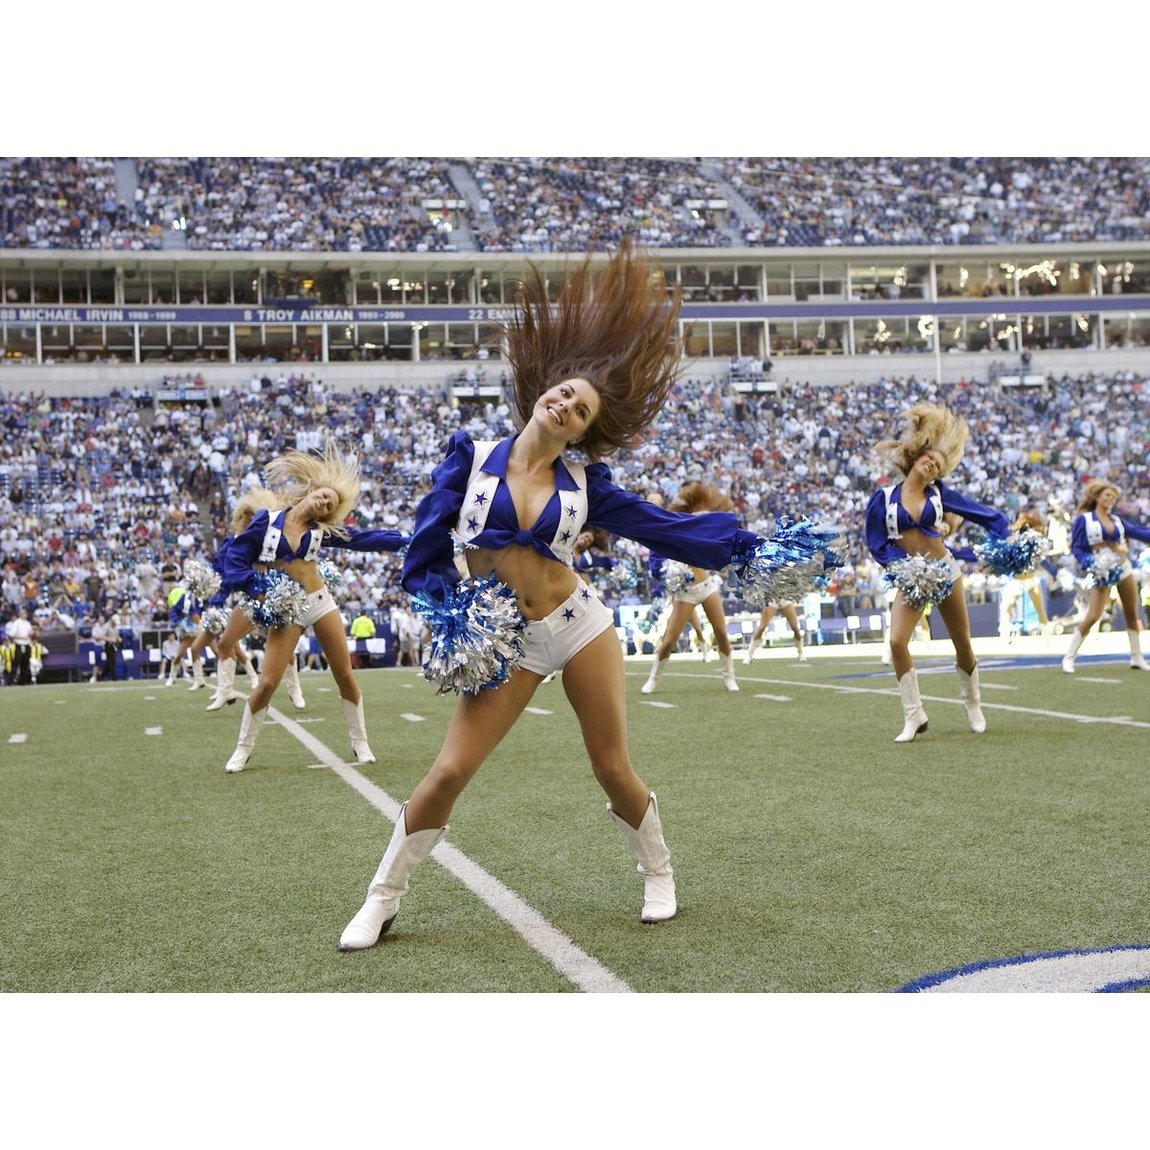 Dallas Cowboys cheerleaders perform before a game against the Philadelphia Eagles at Texas Stadium. Irving, Texas. October 9, 2005. #NeilLeifer #Photography #Dallas #Cowboys #Philadelphia #Eagles #Football #Cheerleaders